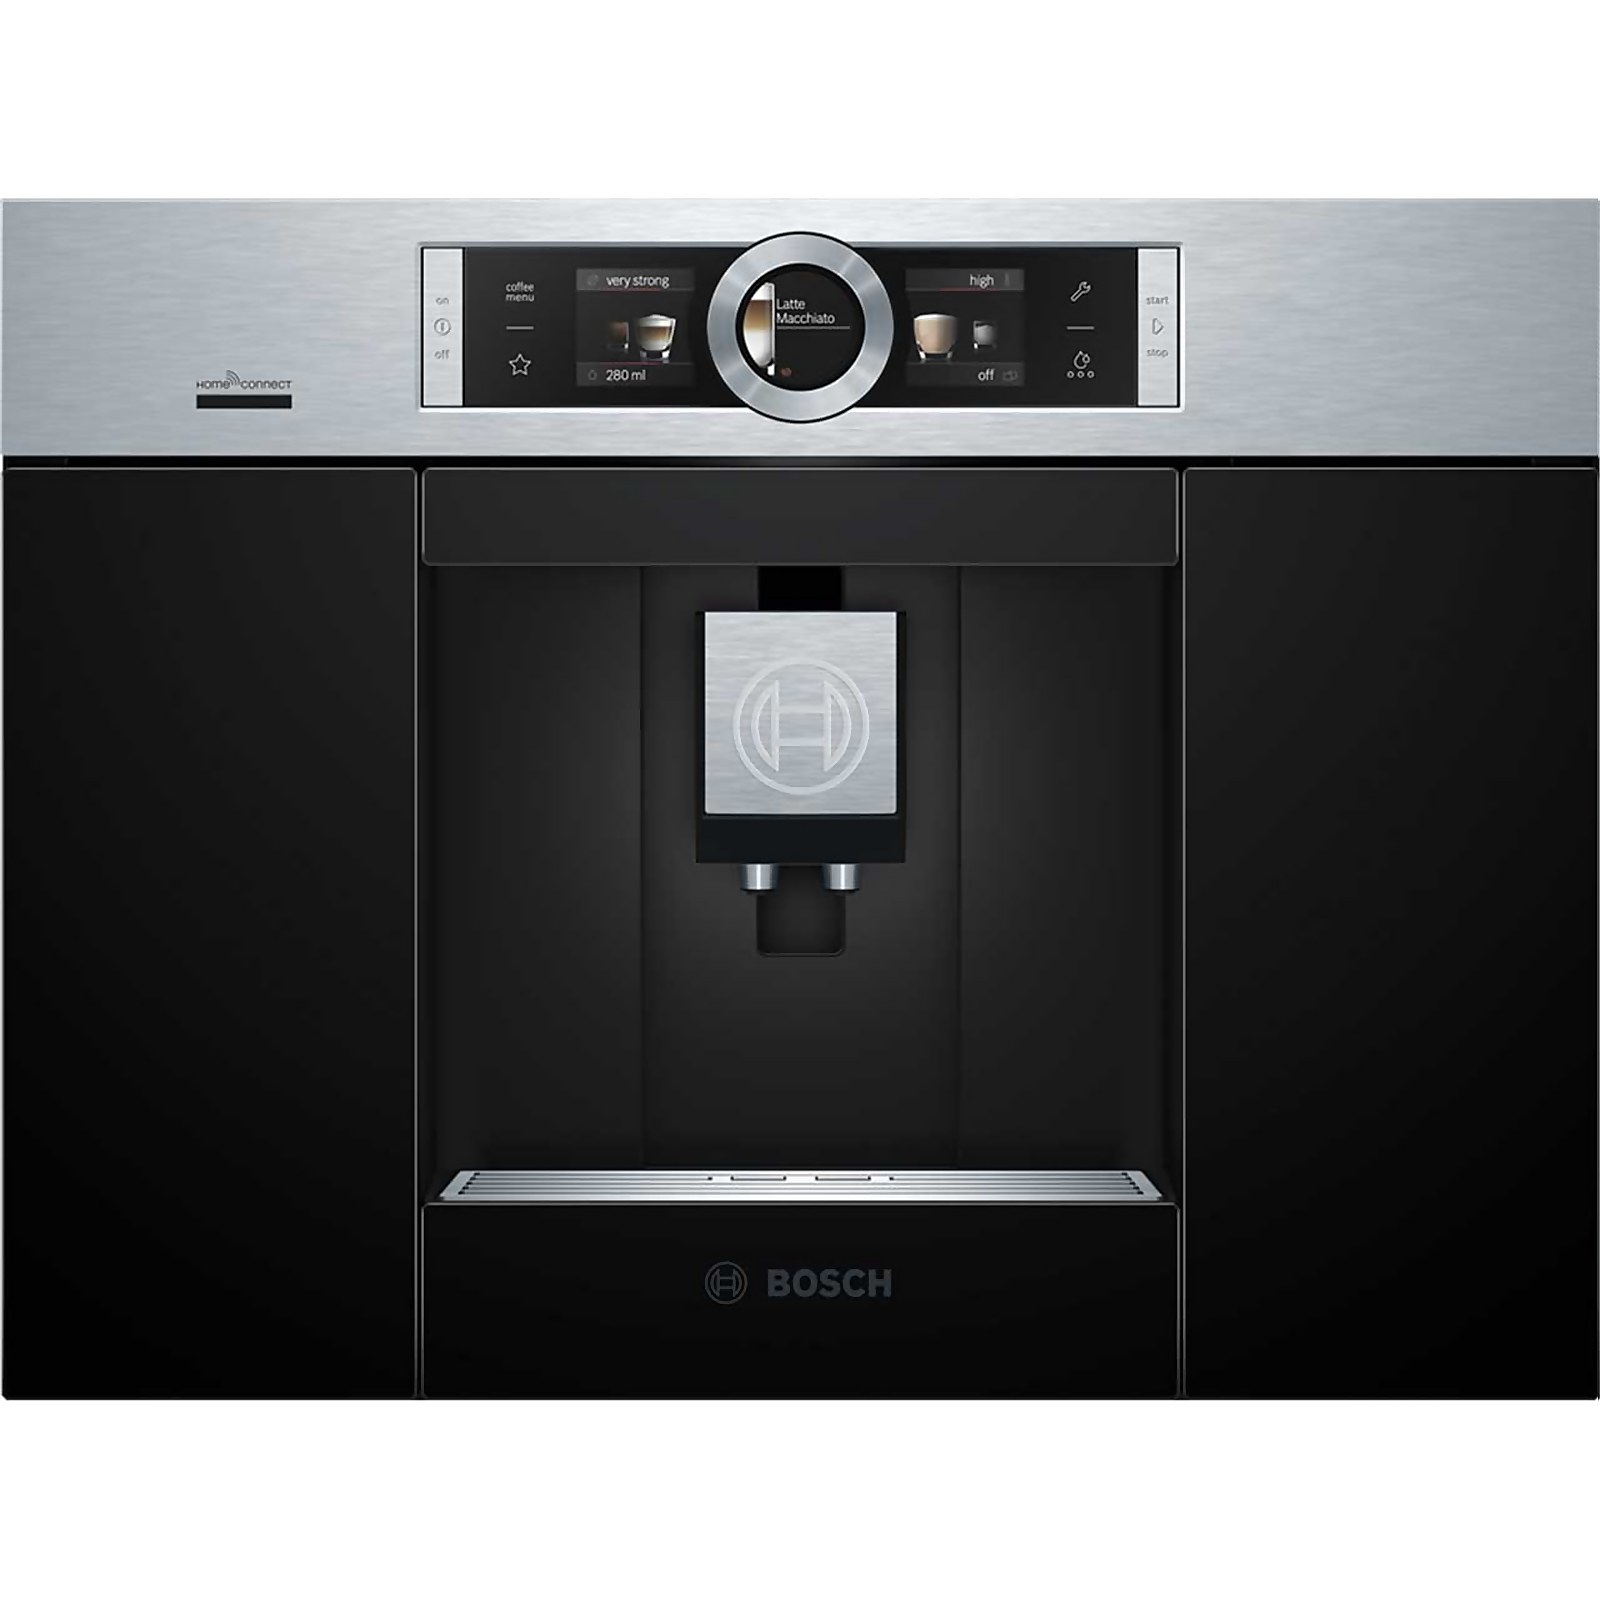 Bosch CTL636ES6 Wifi Connected Built In Bean to Cup Coffee Machine - Stainless Steel